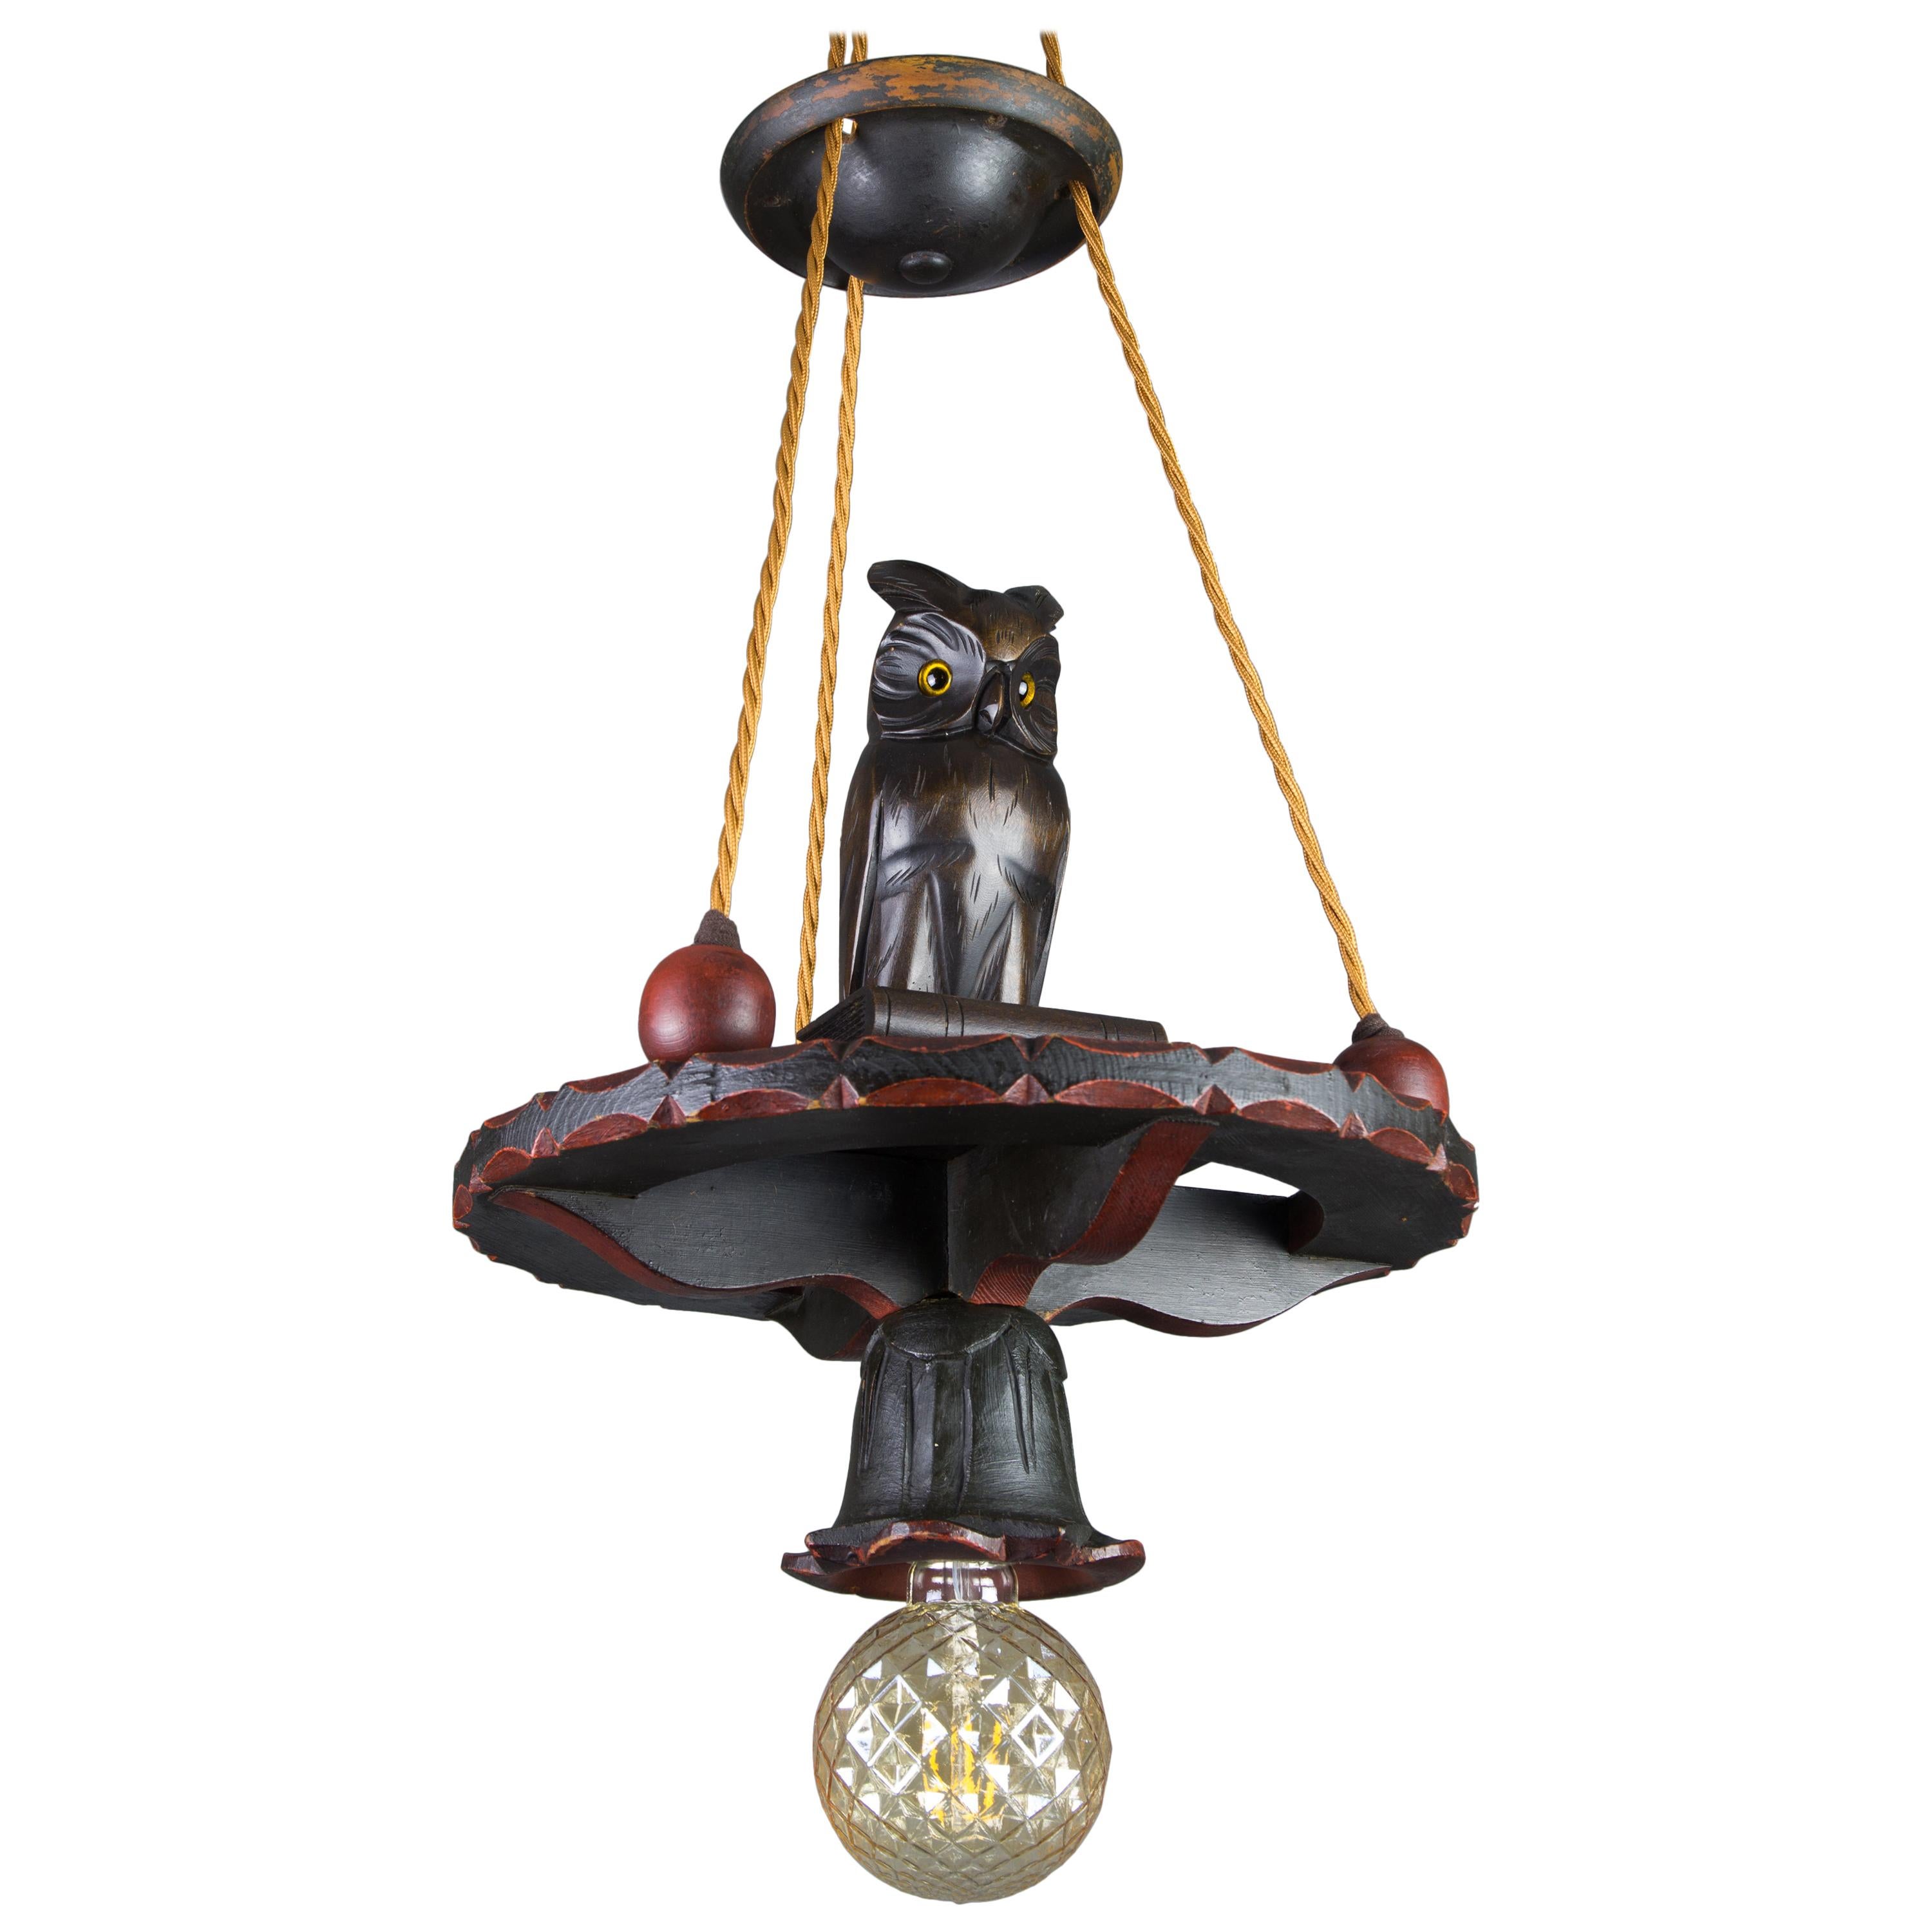 German Hand Carved Wooden Pendant Light Chandelier with Owl Sculpture, 1920s